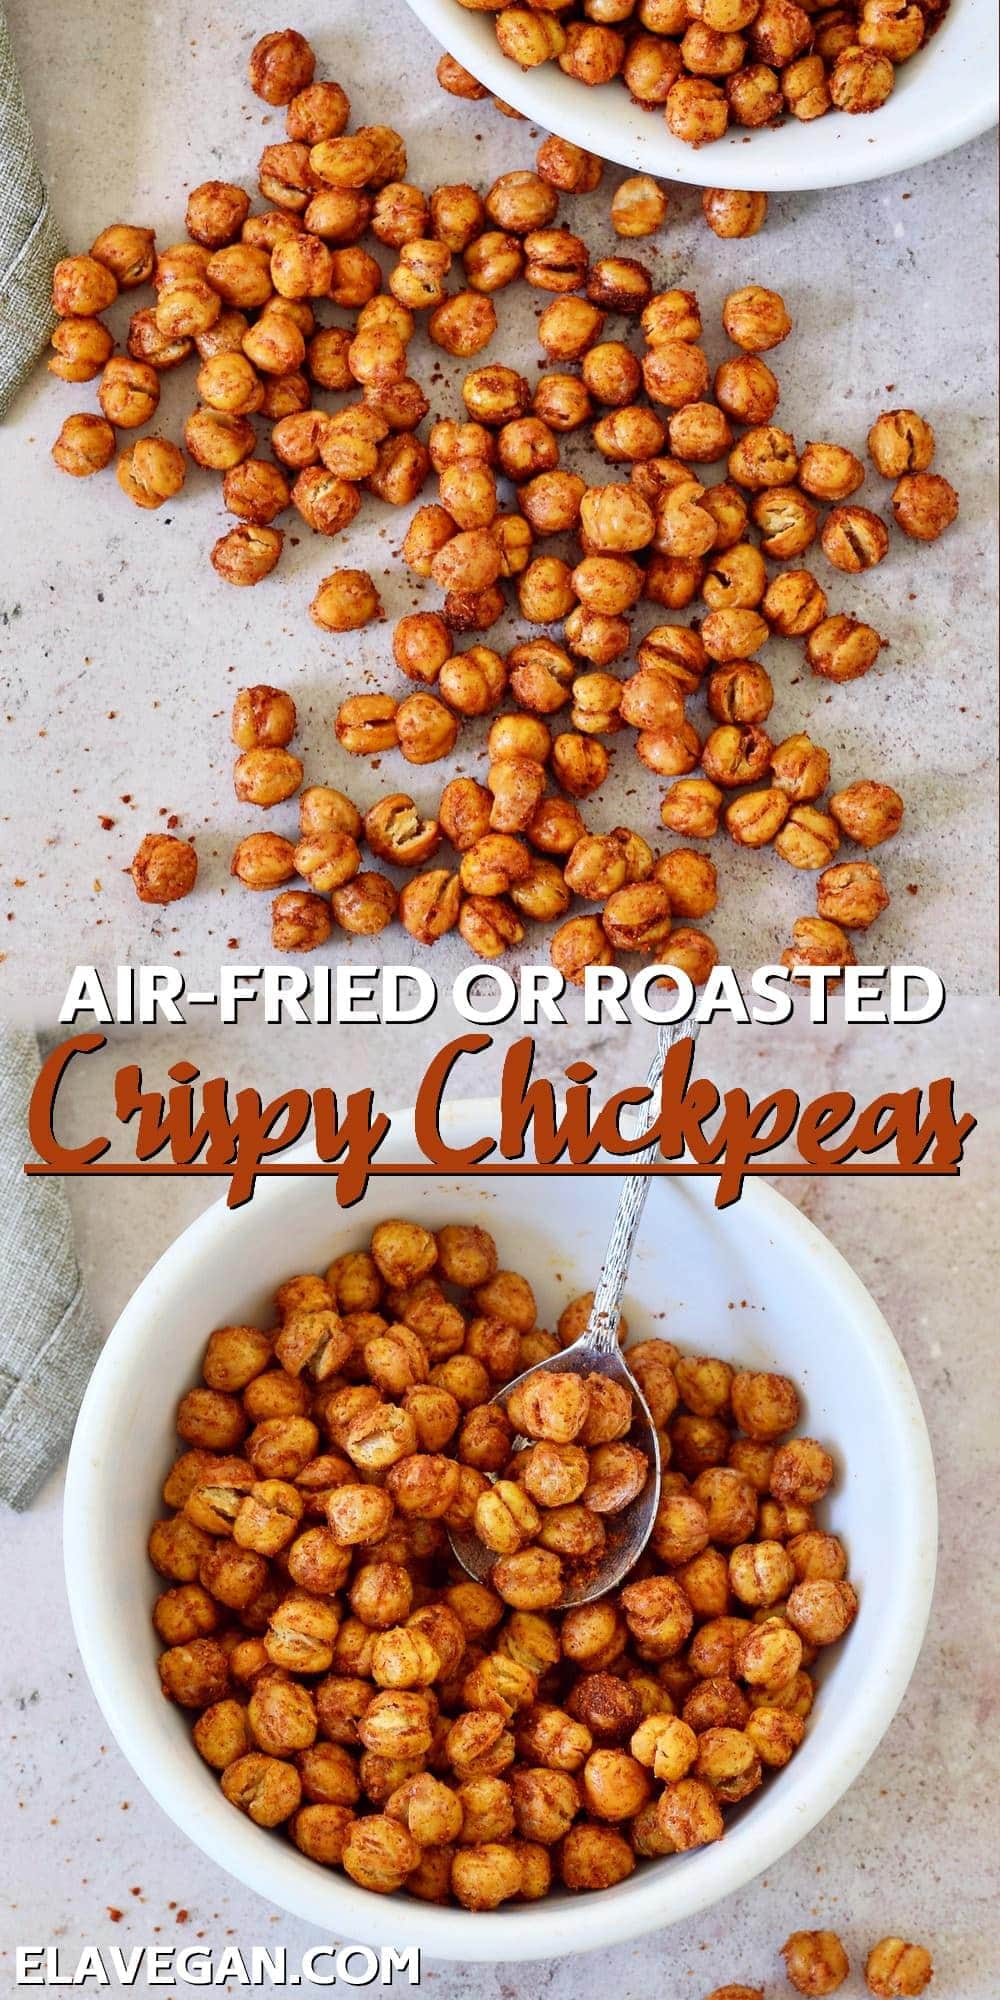 Collage air-fried or roasted crispy chickpeas